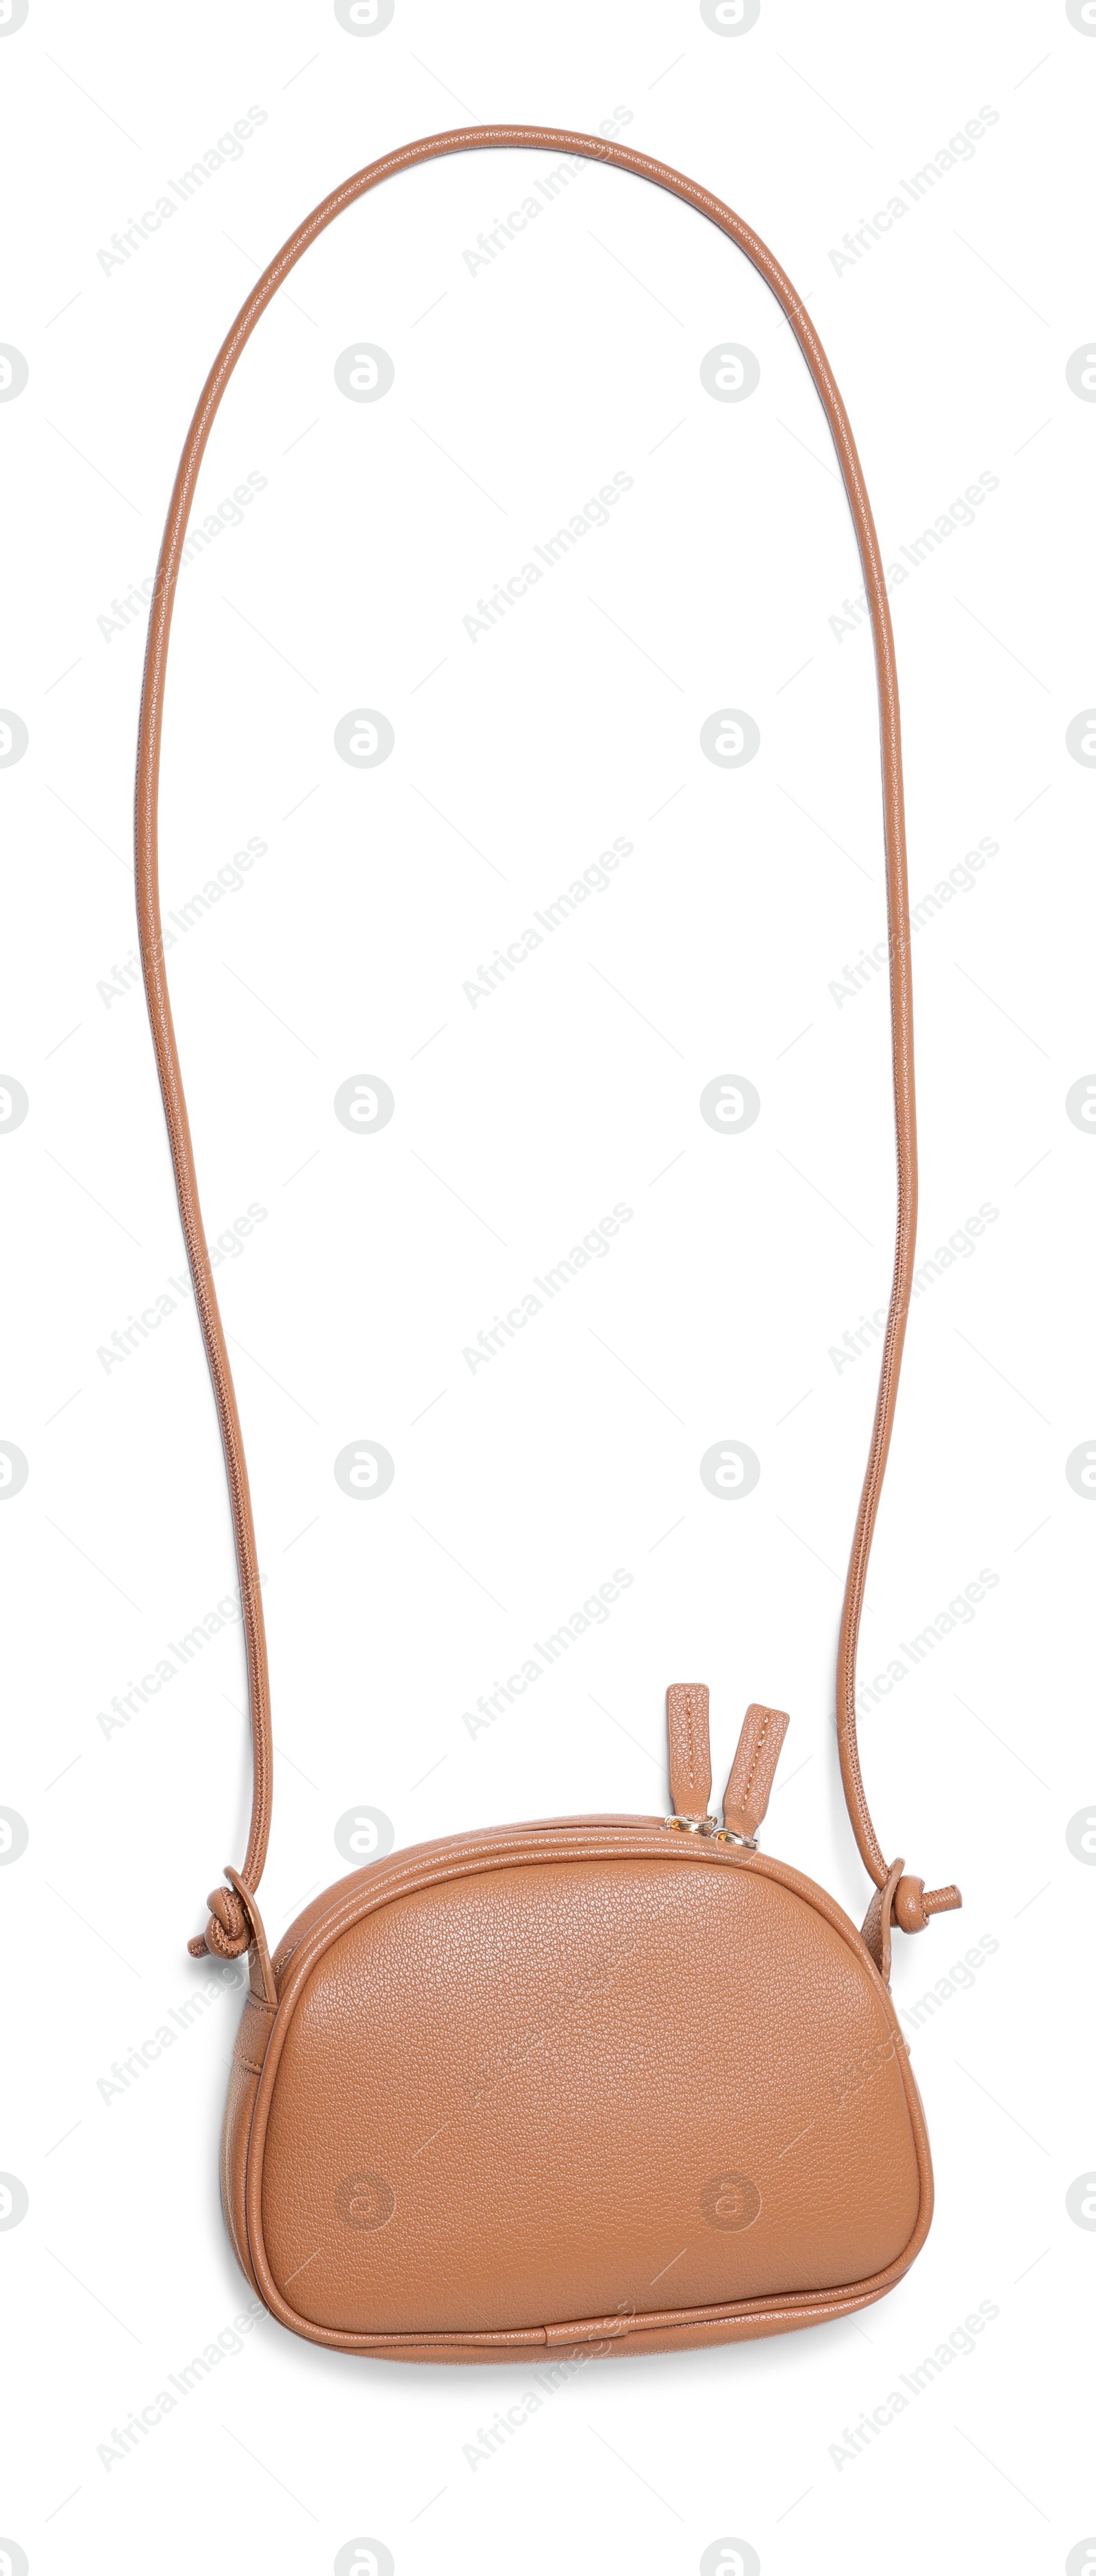 Photo of Stylish light brown leather handbag isolated on white, top view